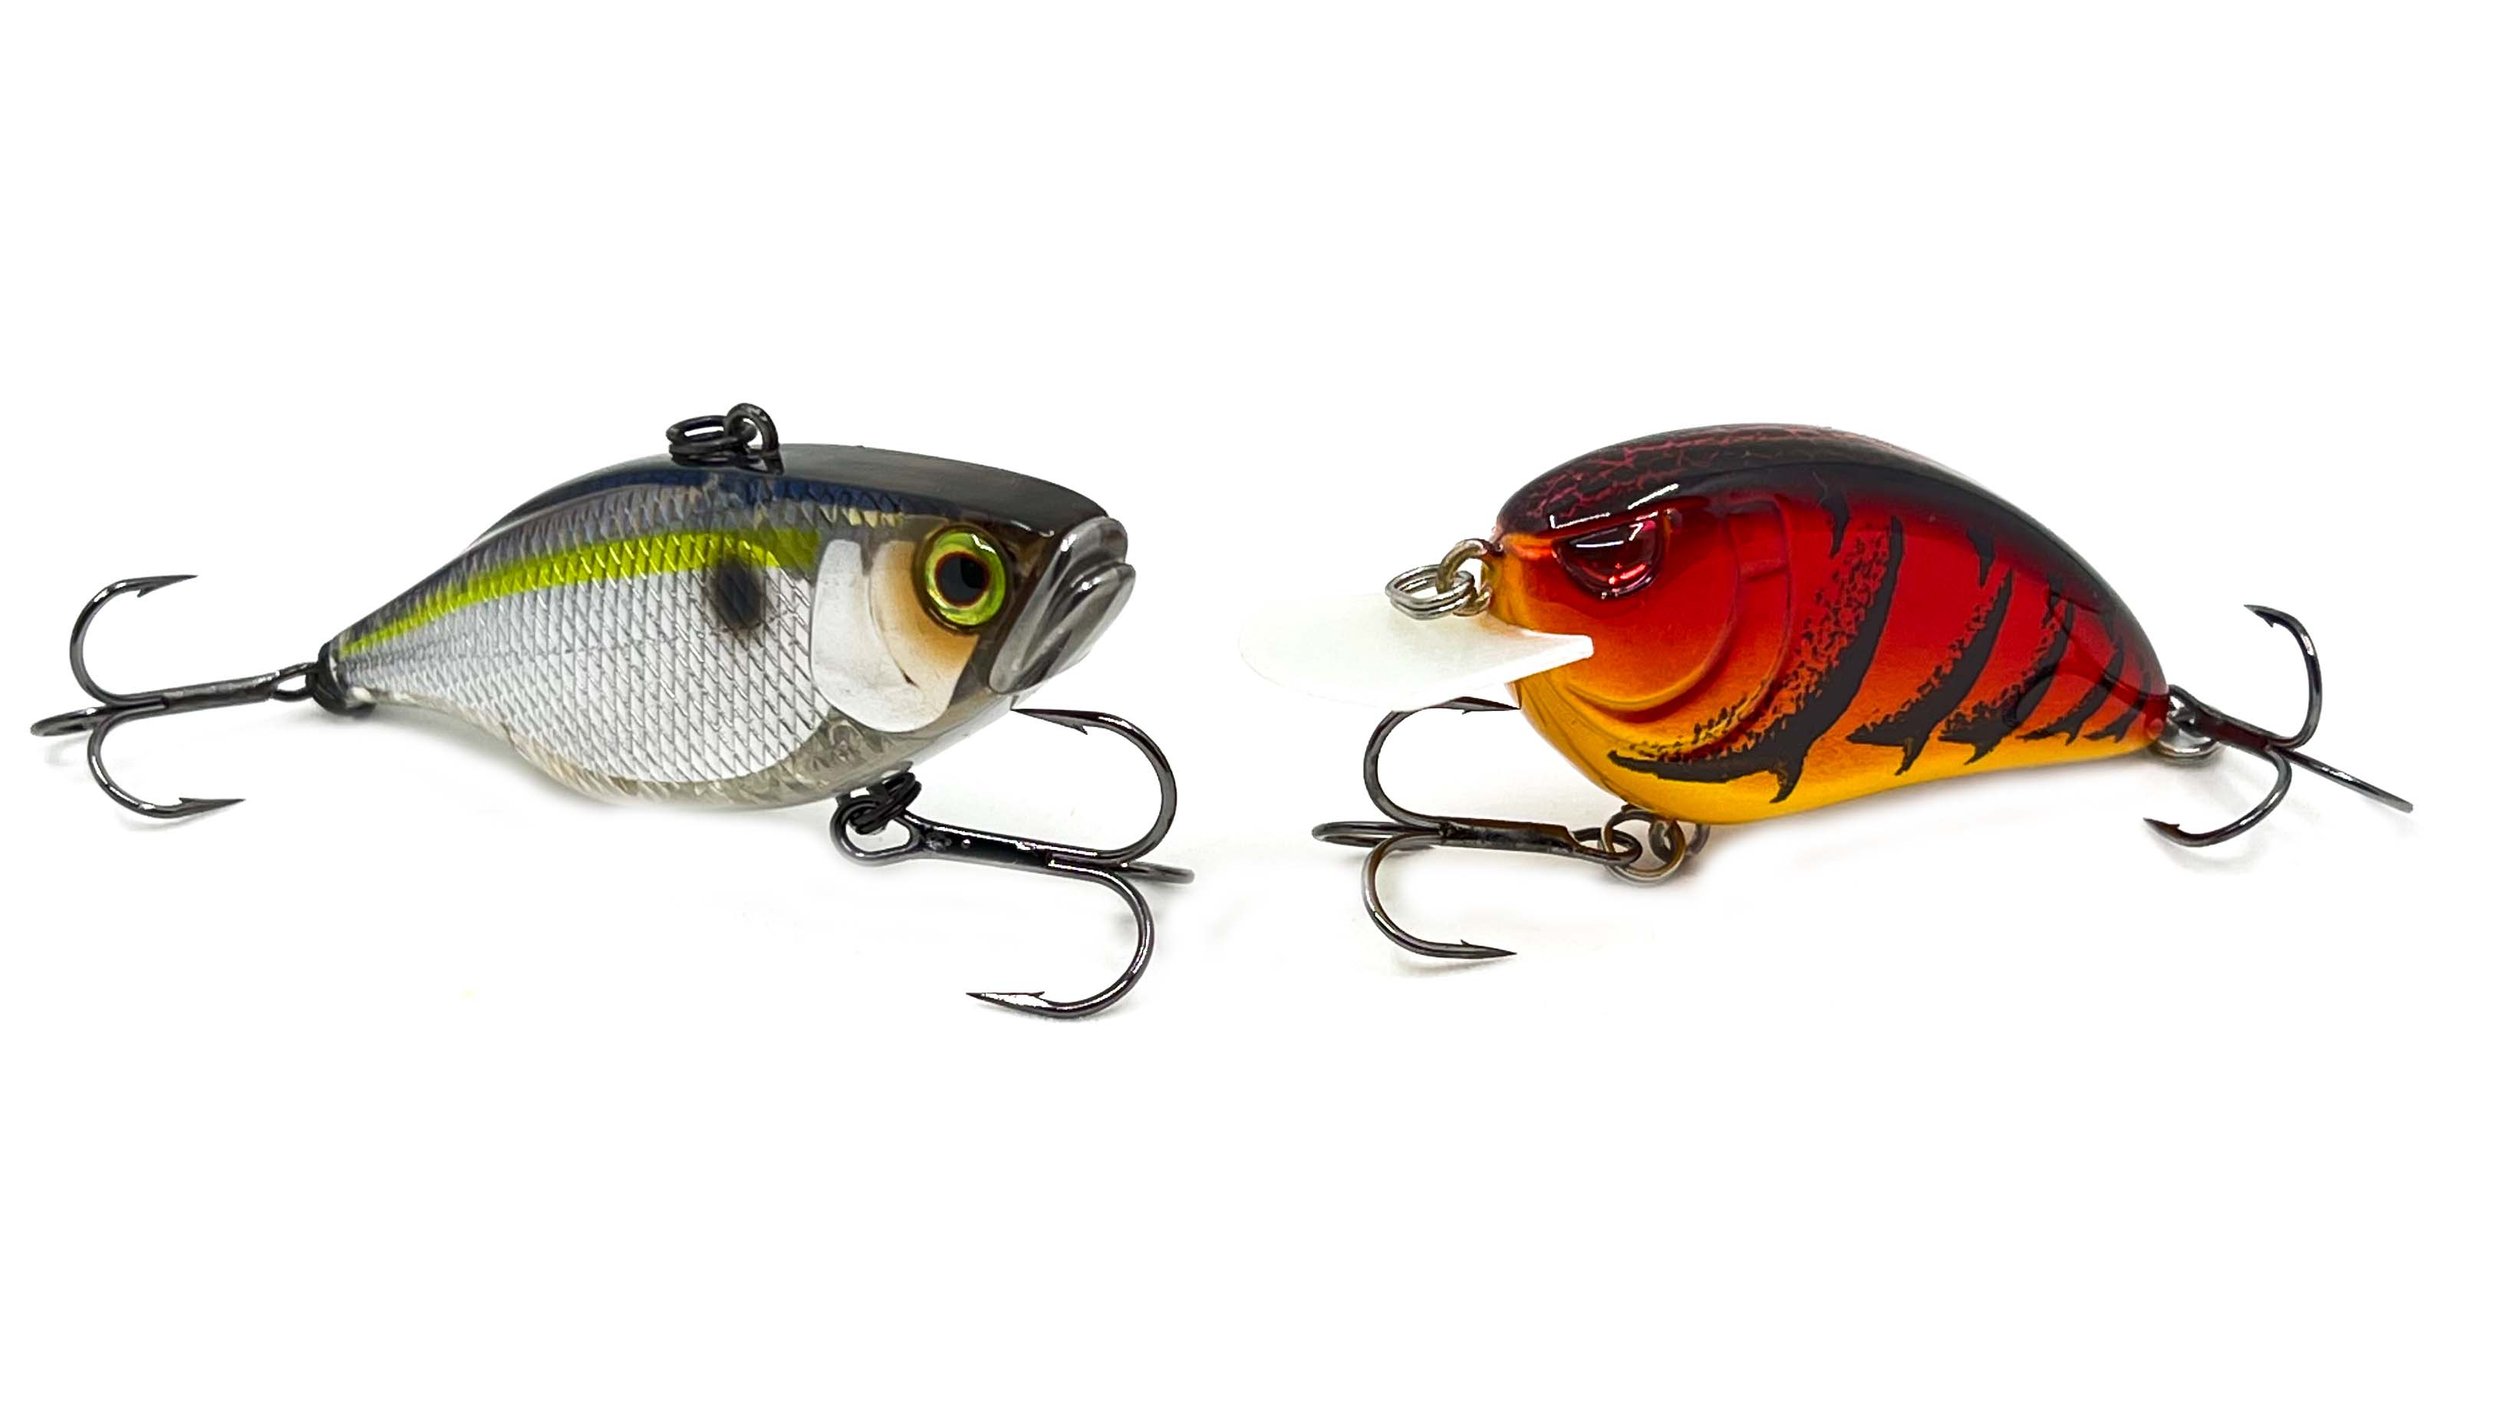 TOP 5 BAITS FOR FEBRUARY BASS FISHING! — Tactical Bassin' - Bass